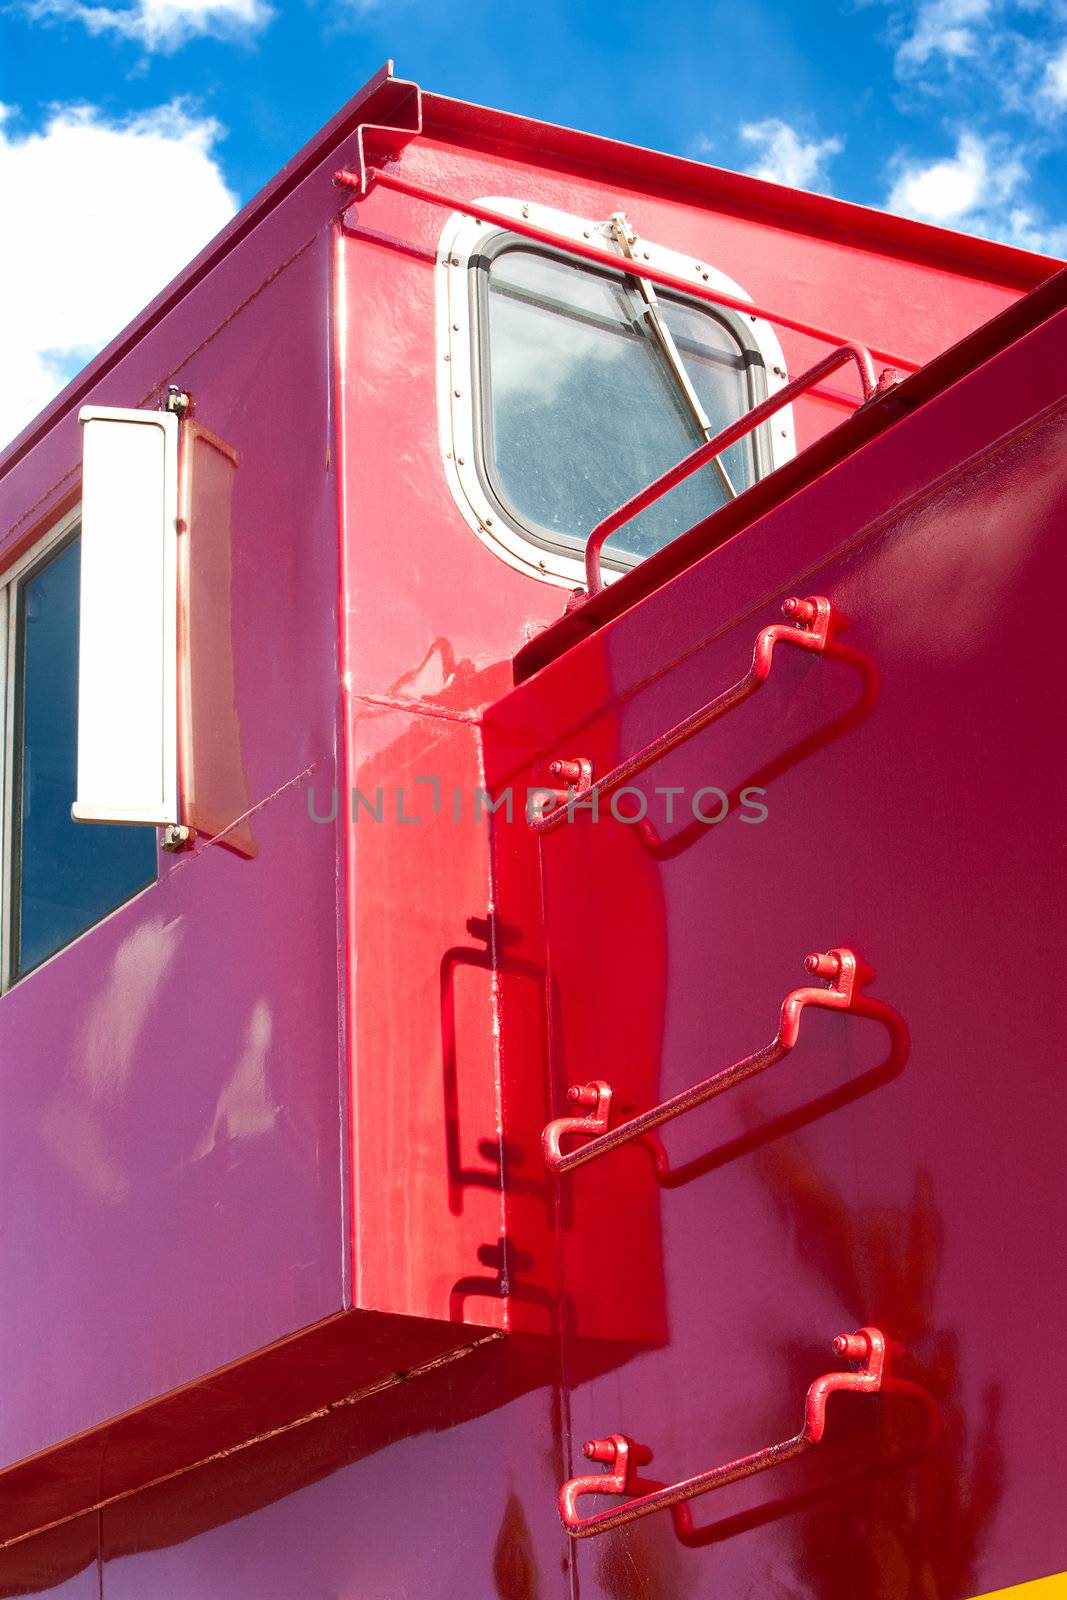 Detail of red train caboose against blue sky